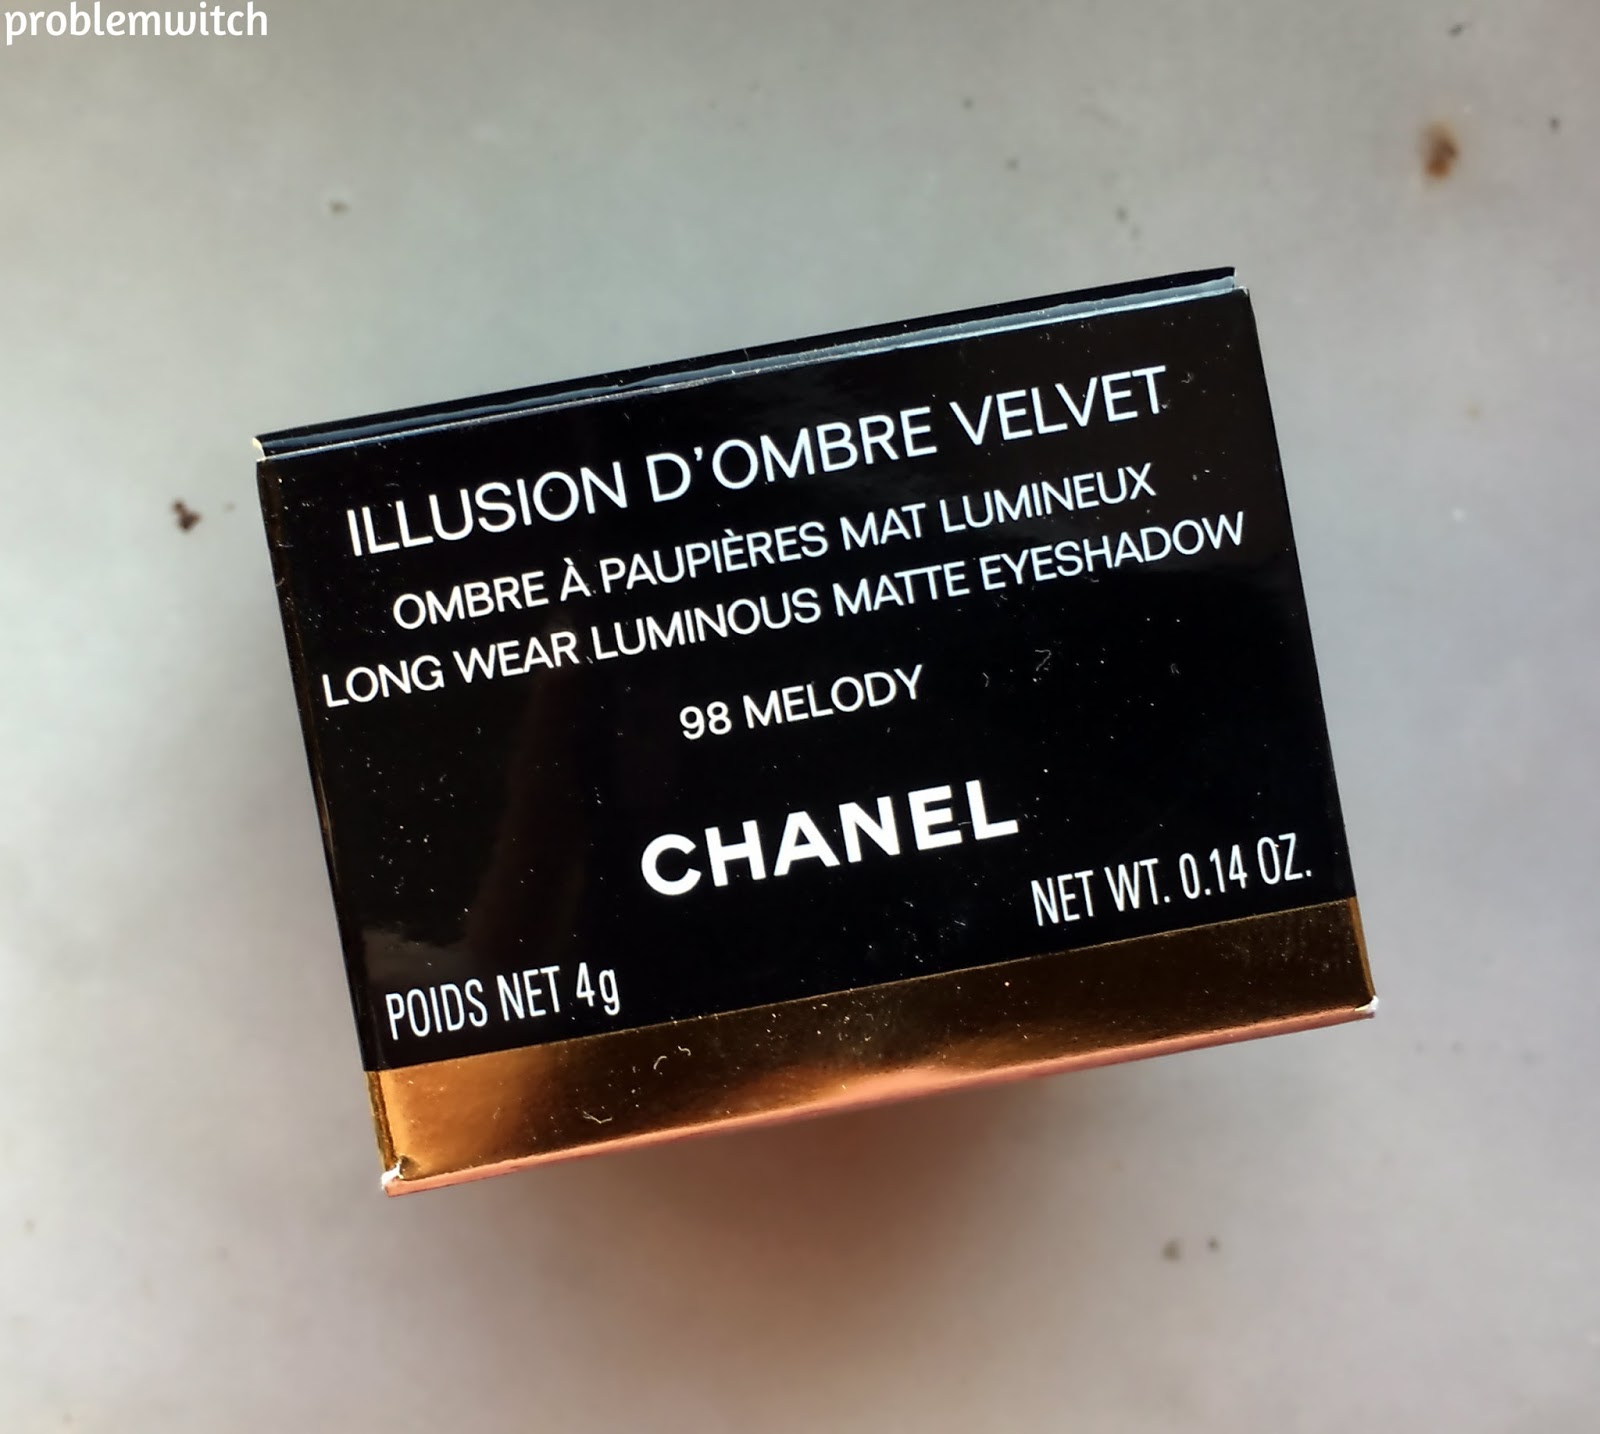 Makeup and Beauty Product Reviews by ProblemWitch: Chanel, Illusion D'Ombre  Velvet, Long Wear Luminous Matte Eyeshadow, Melody